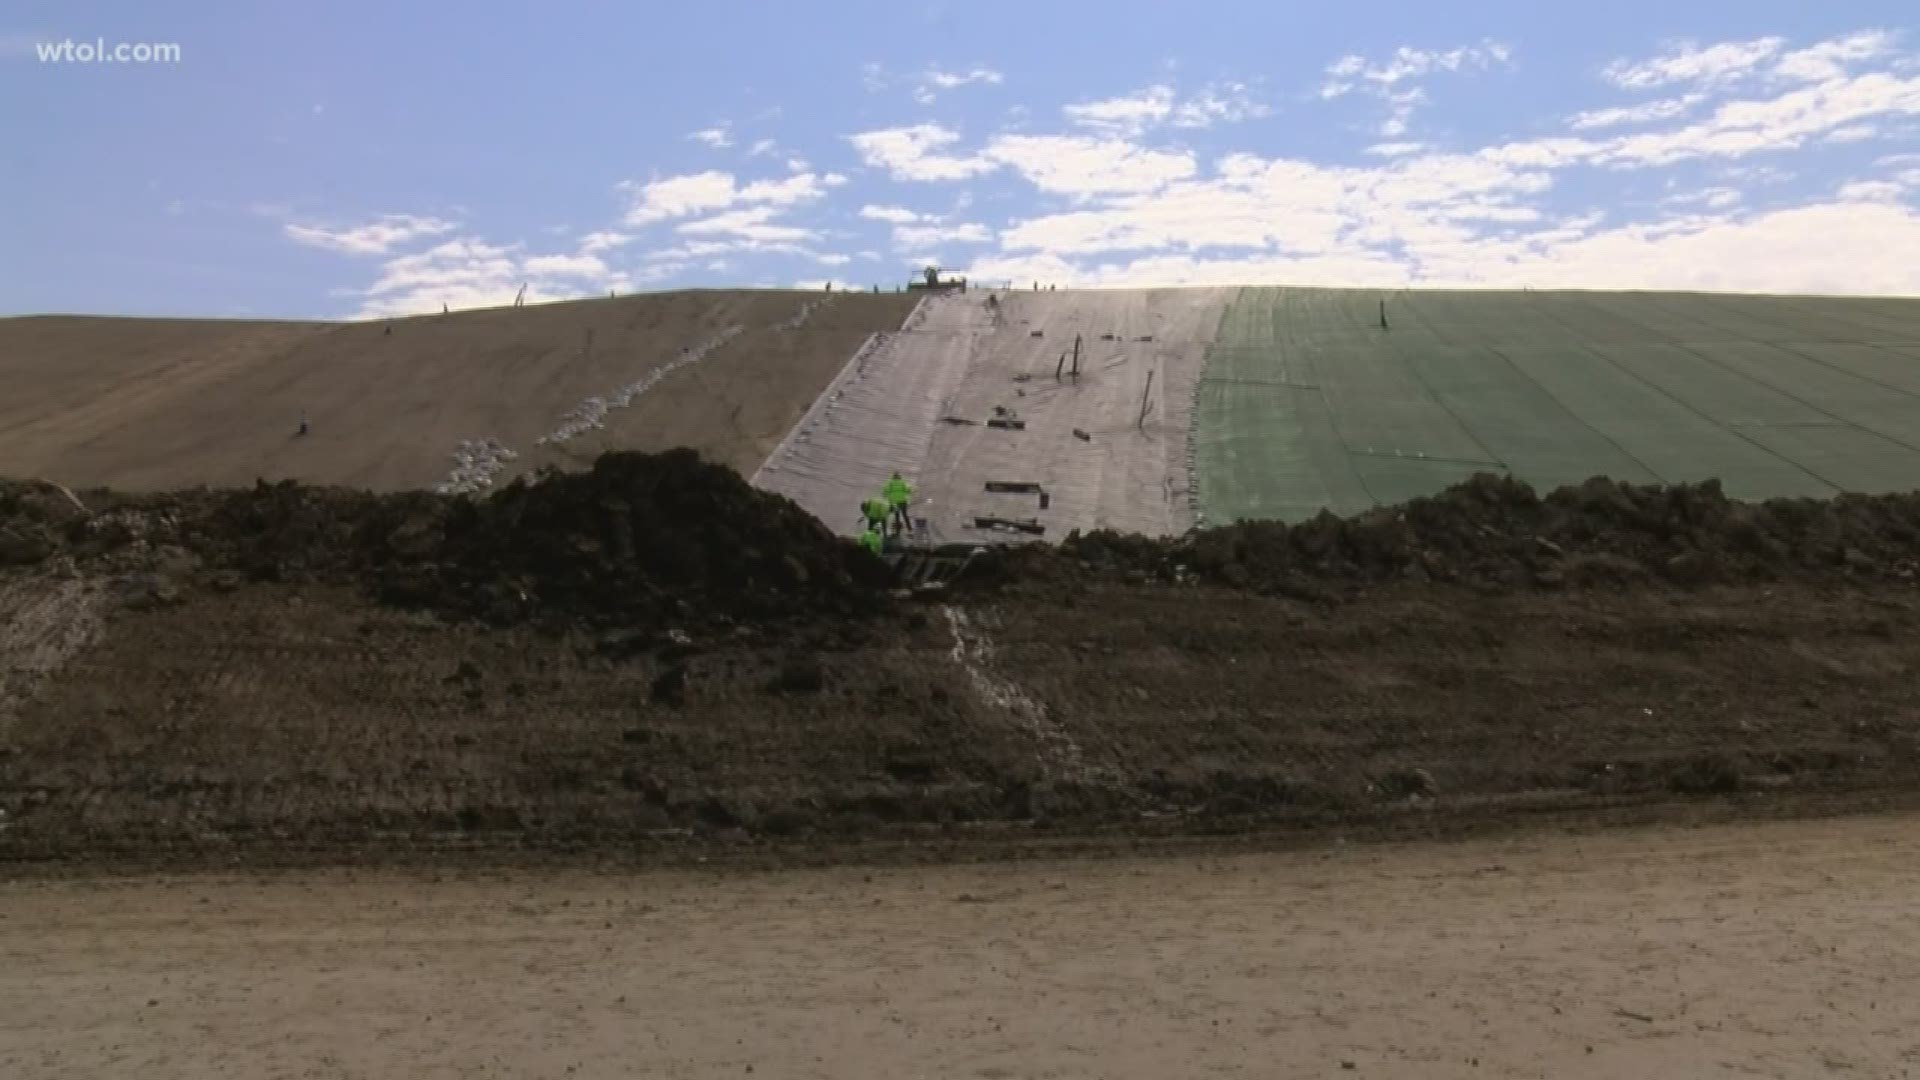 Seneca Co. local health department attorney recommended Monday in a public meeting that Sunny Farms Landfill get its license approved despite residents' complaints.